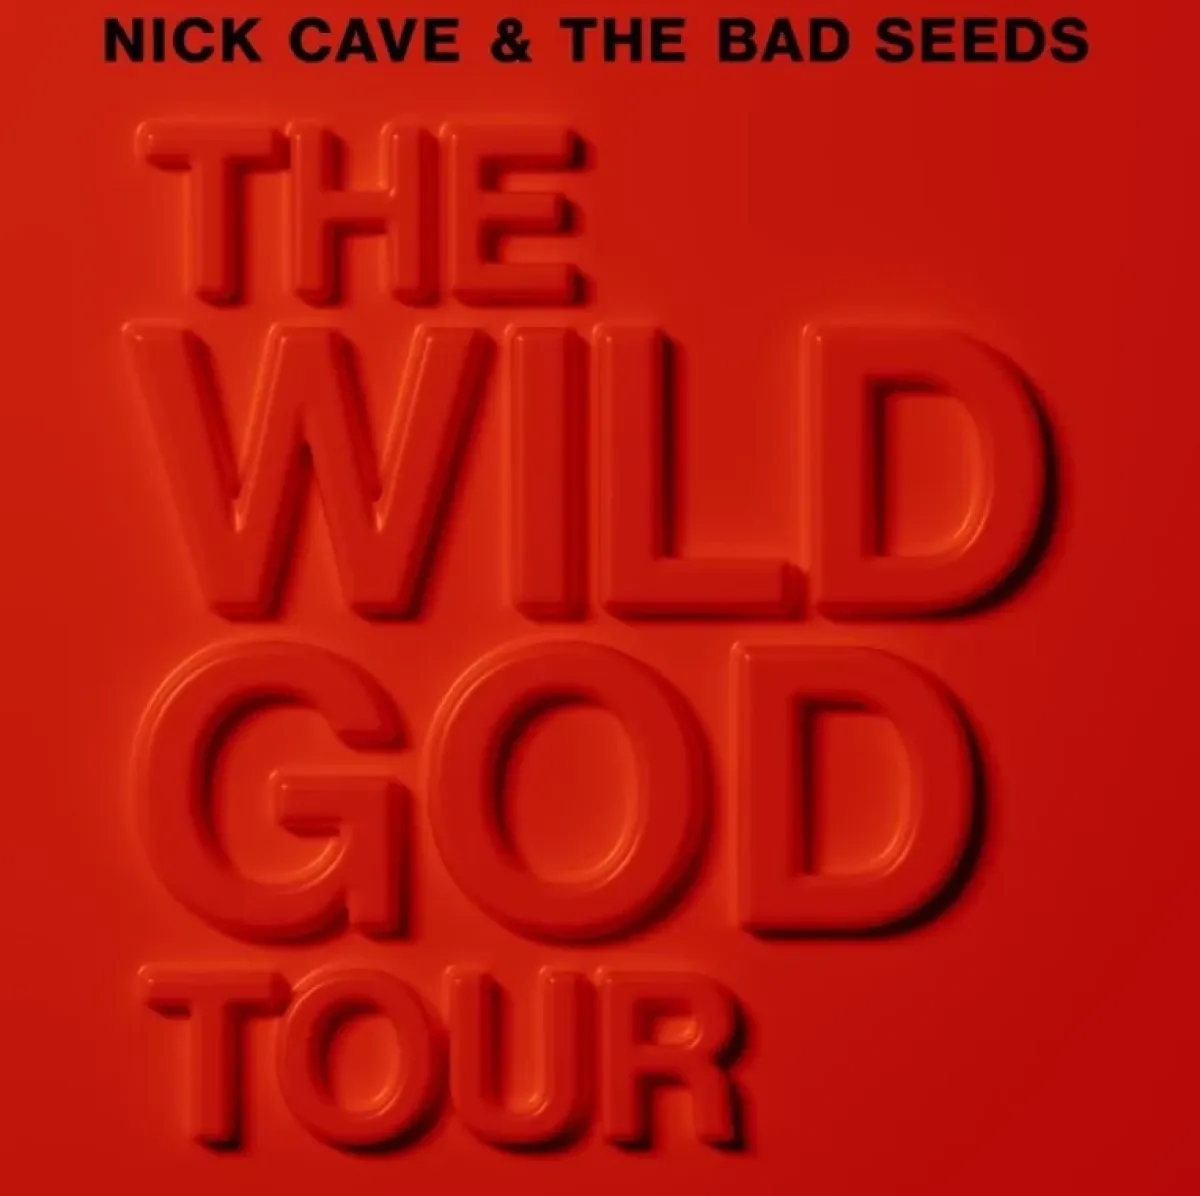 Nick Cave and the Bad Seeds at Hallenstadion Tickets